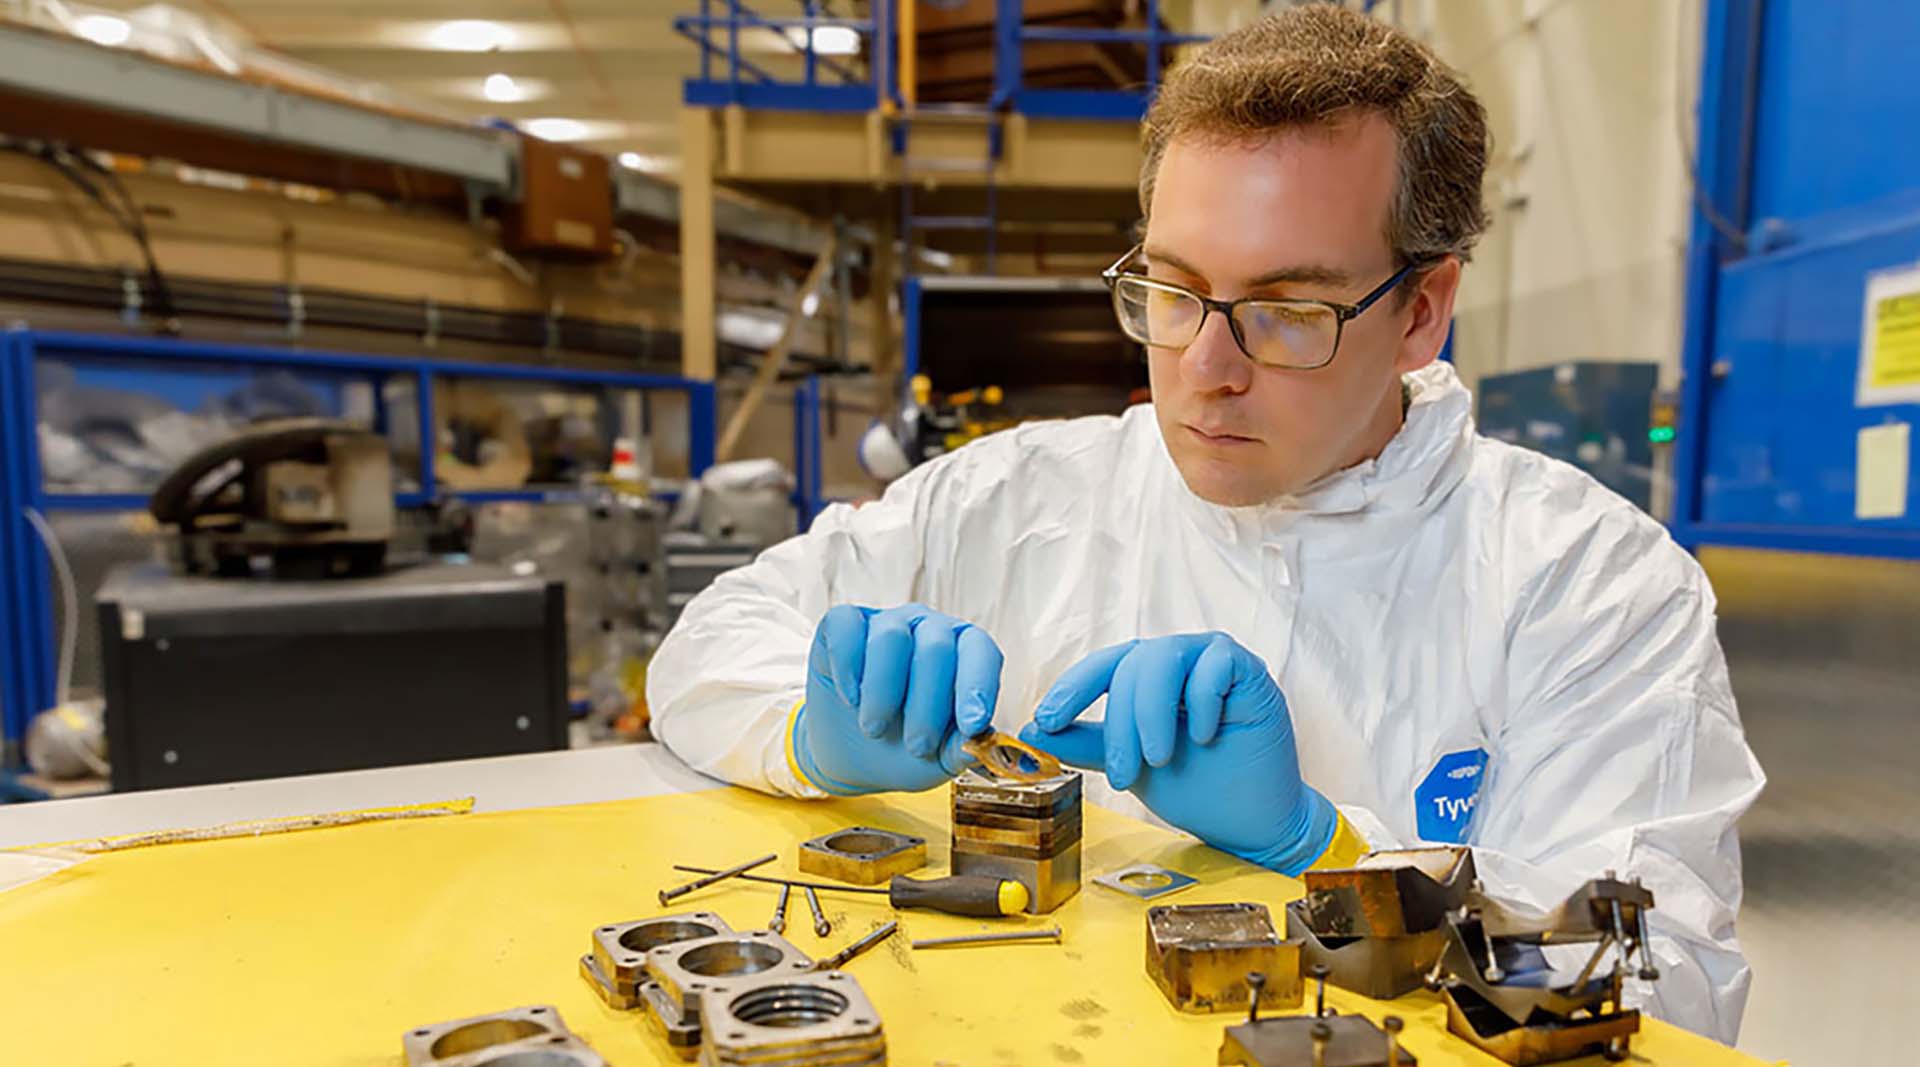 A Sandia physicist loads sample coatings into holders to test in Sandia’s Z machine.